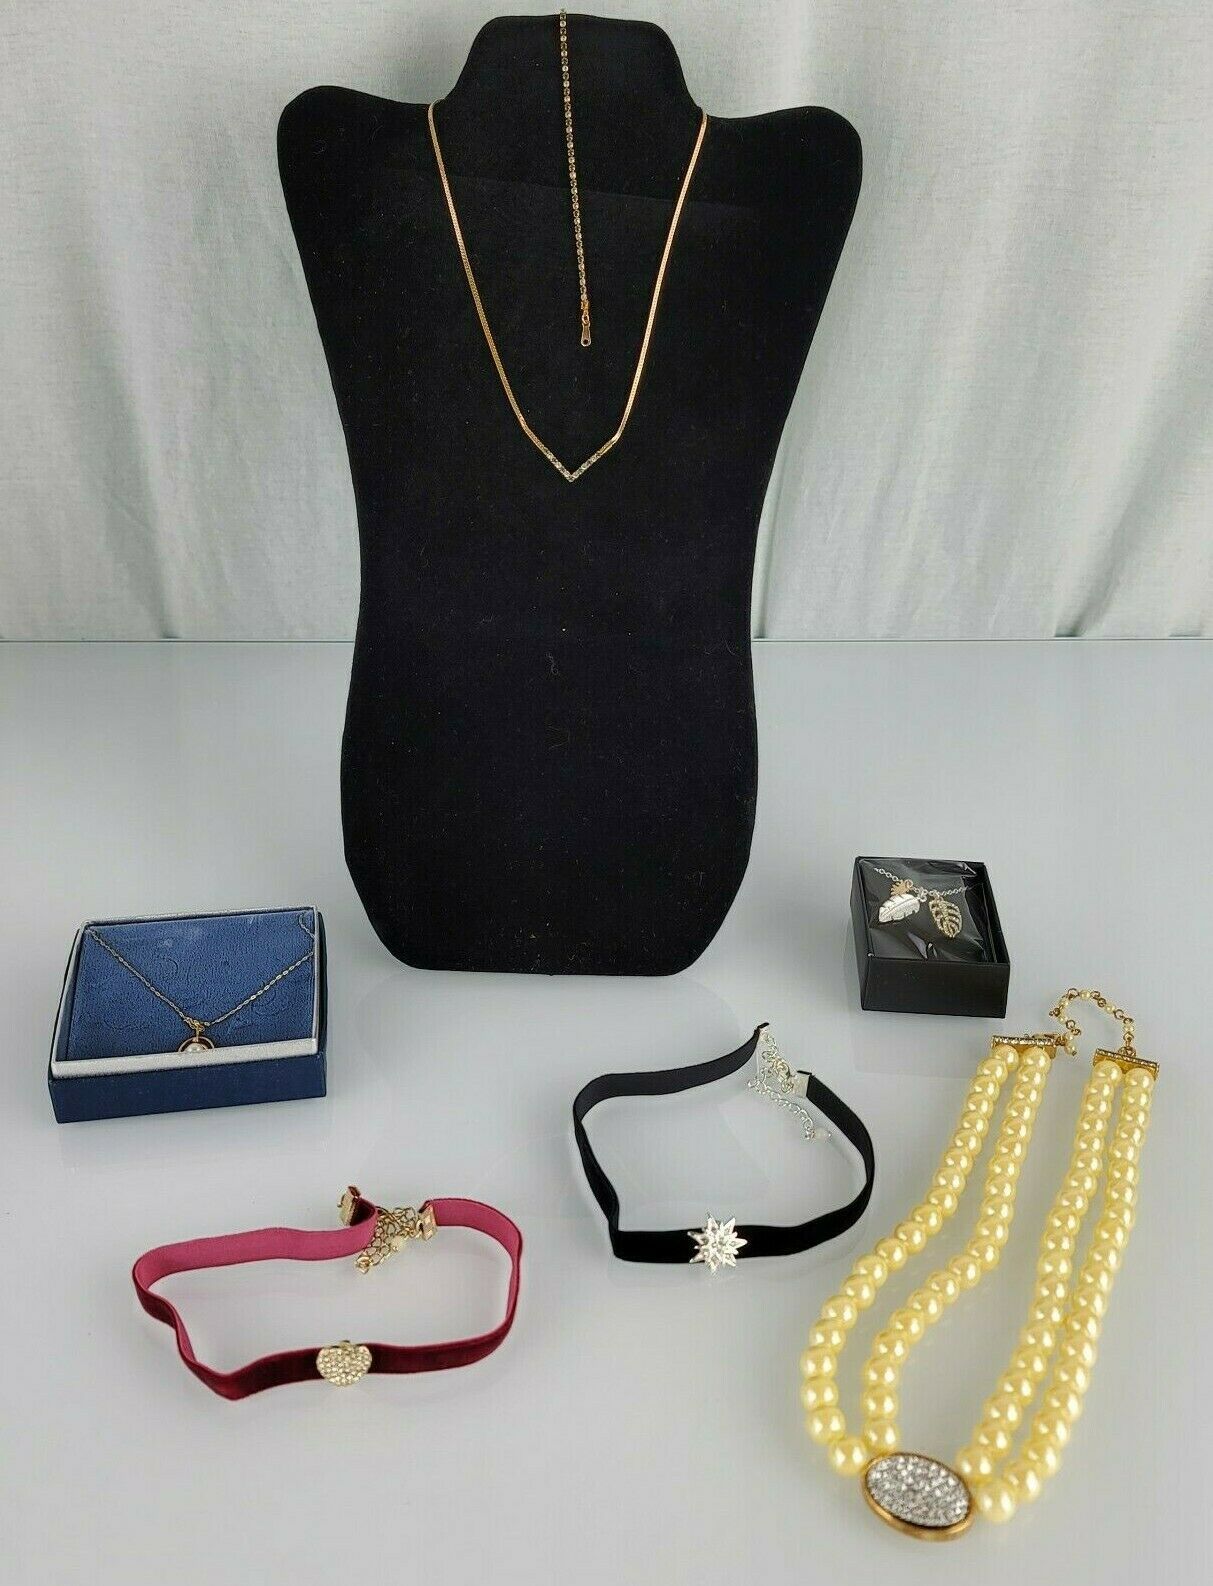 Primary image for Avon Costume Jewelry Necklace Set Lot Velvet Choker Palm Leaf Pendant Collection